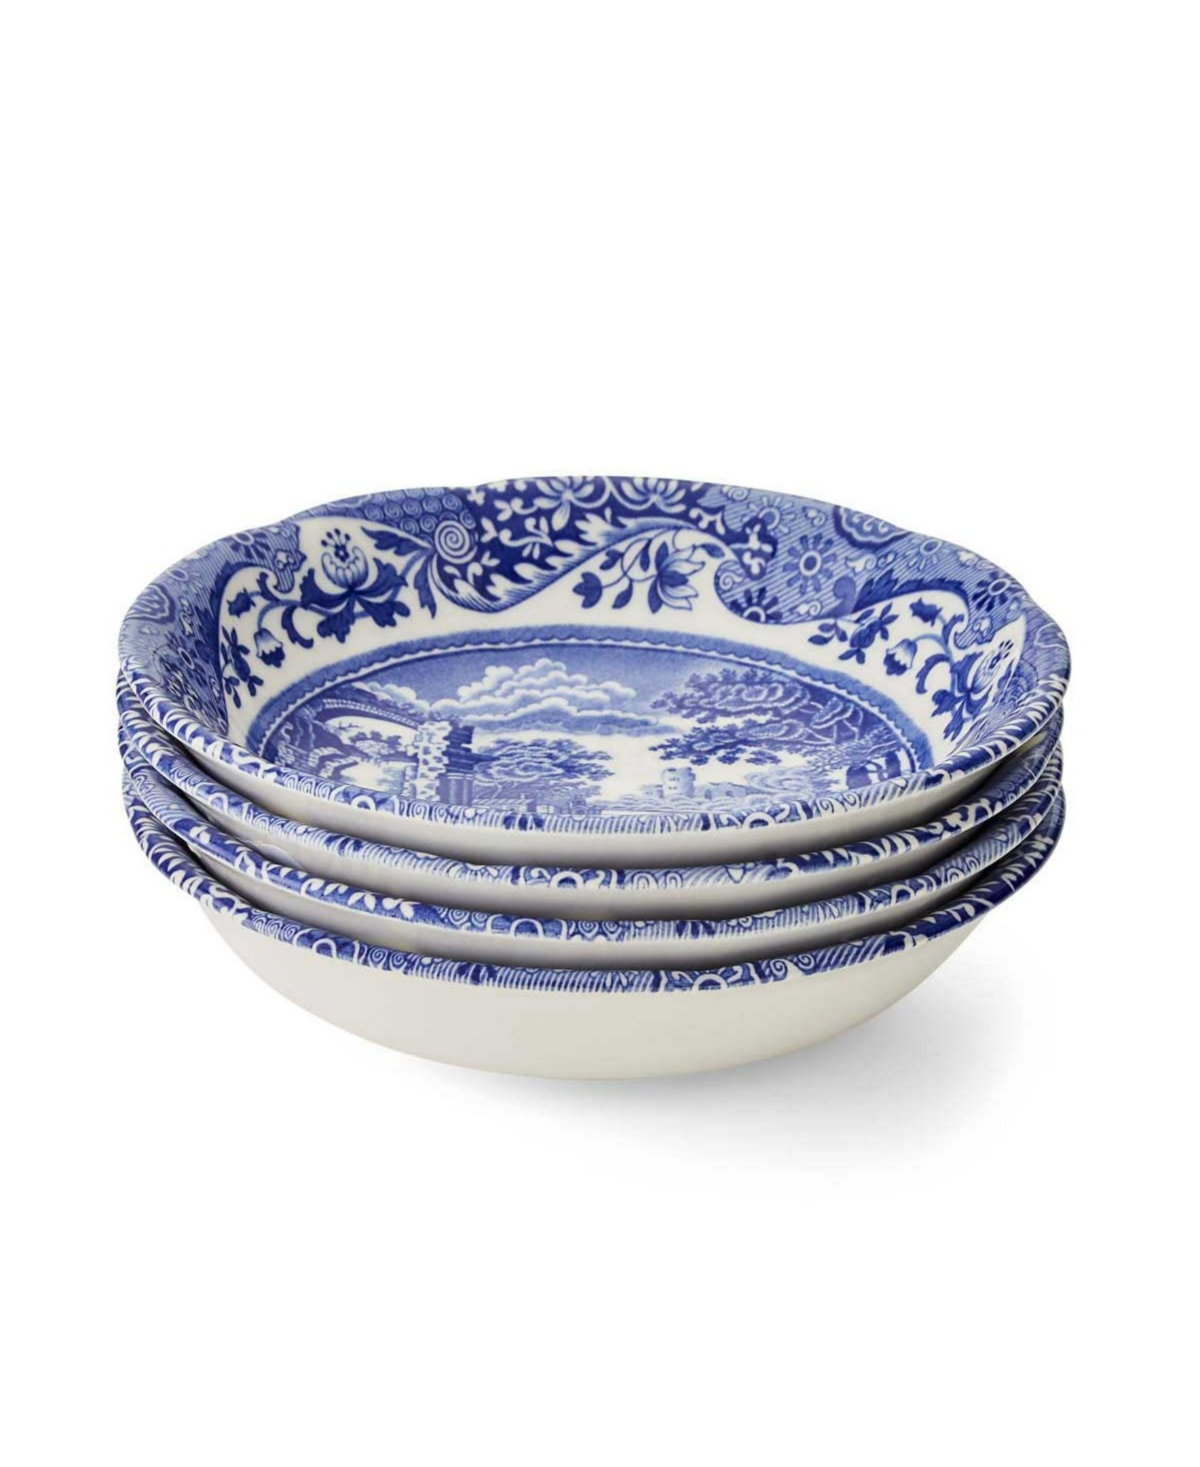 Italian 6.5" Cereal Bowls, Set of 4 - Blue